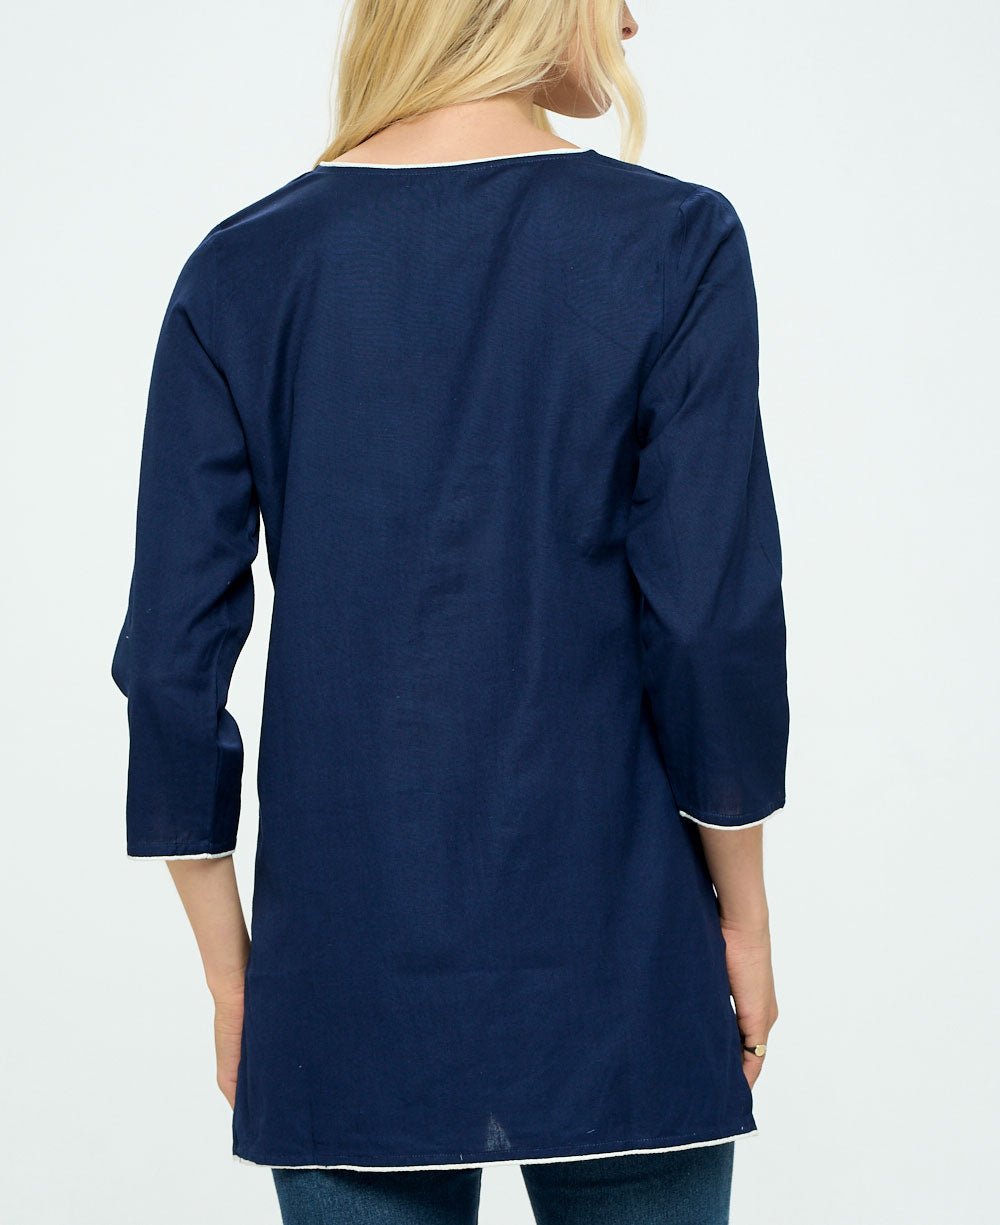 Tree of Life Blue Cotton Tunic Top - Shirts & Tops S